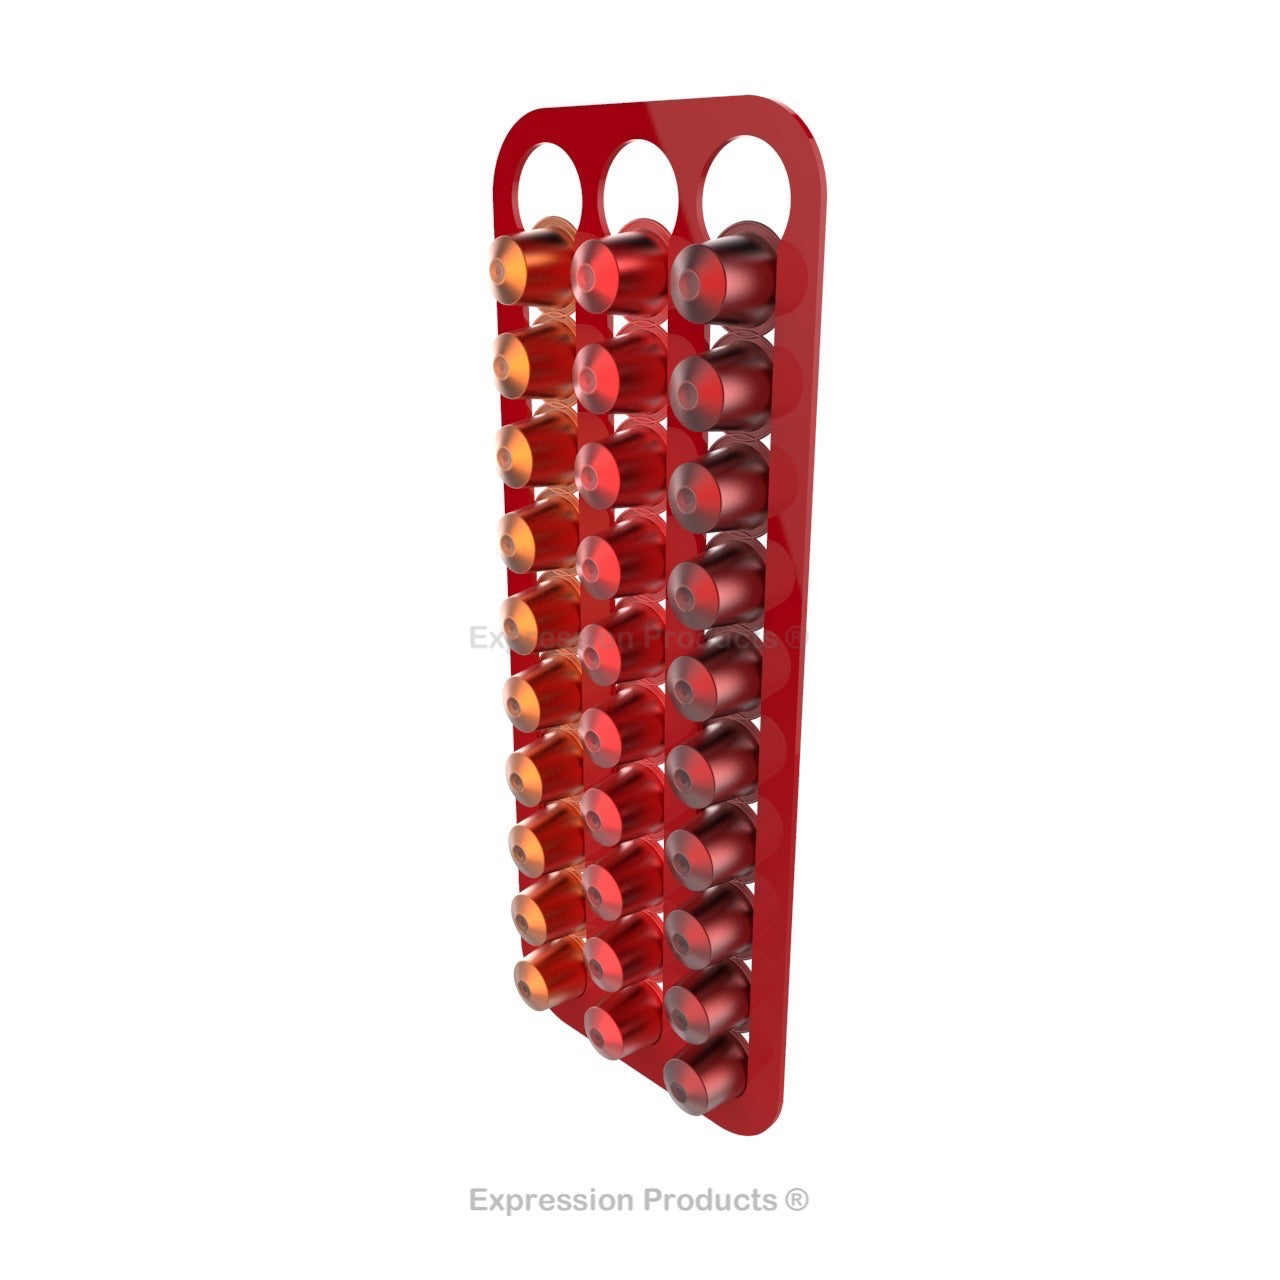 Magnetic Nespresso Original Line coffee pod holder shown in red holding 30 pods